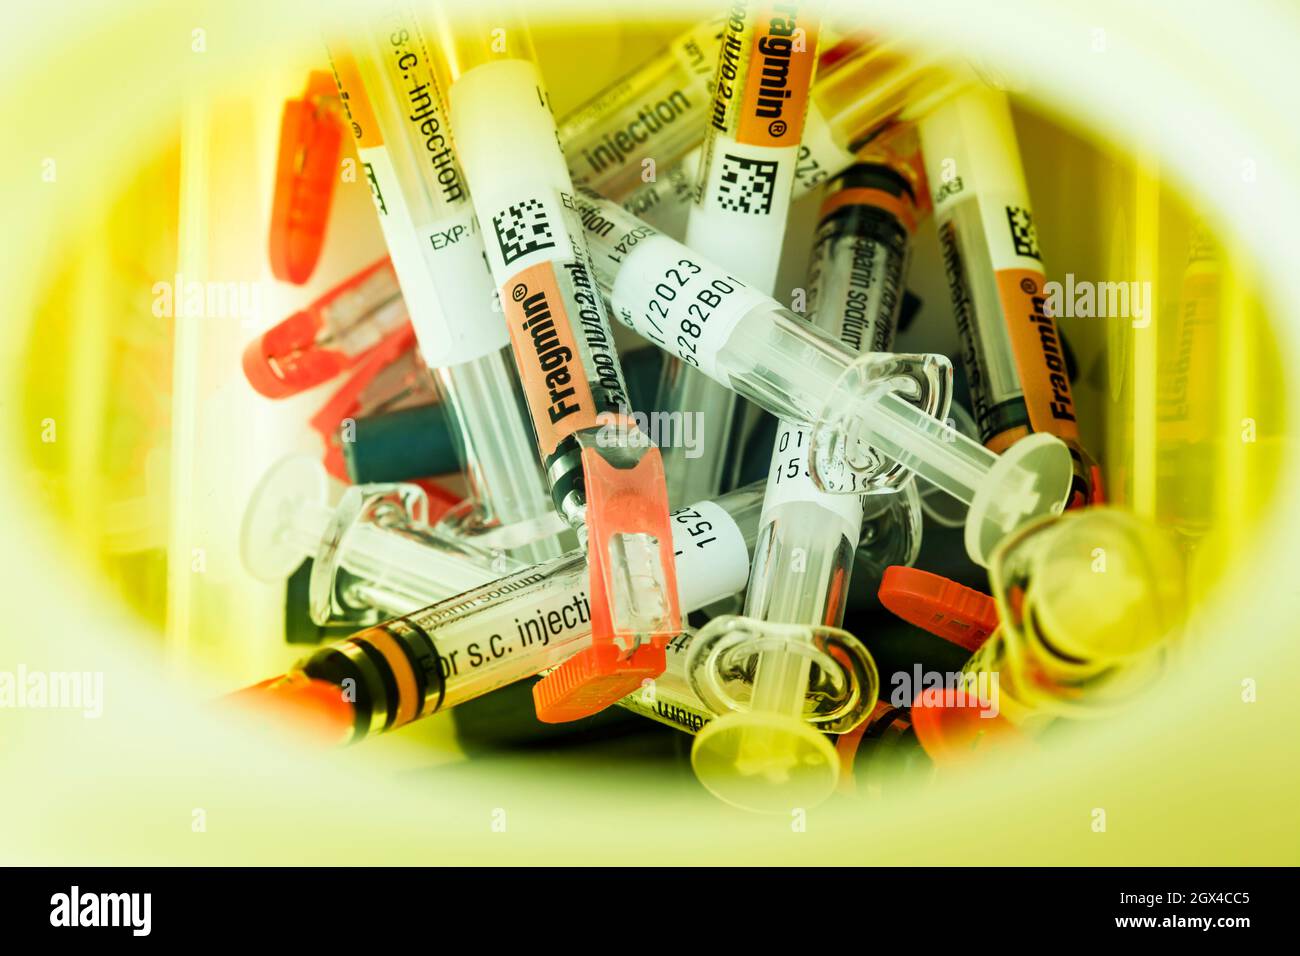 Used Fragmin syringes safely disposed of into a sharps box or sharpsafe Stock Photo